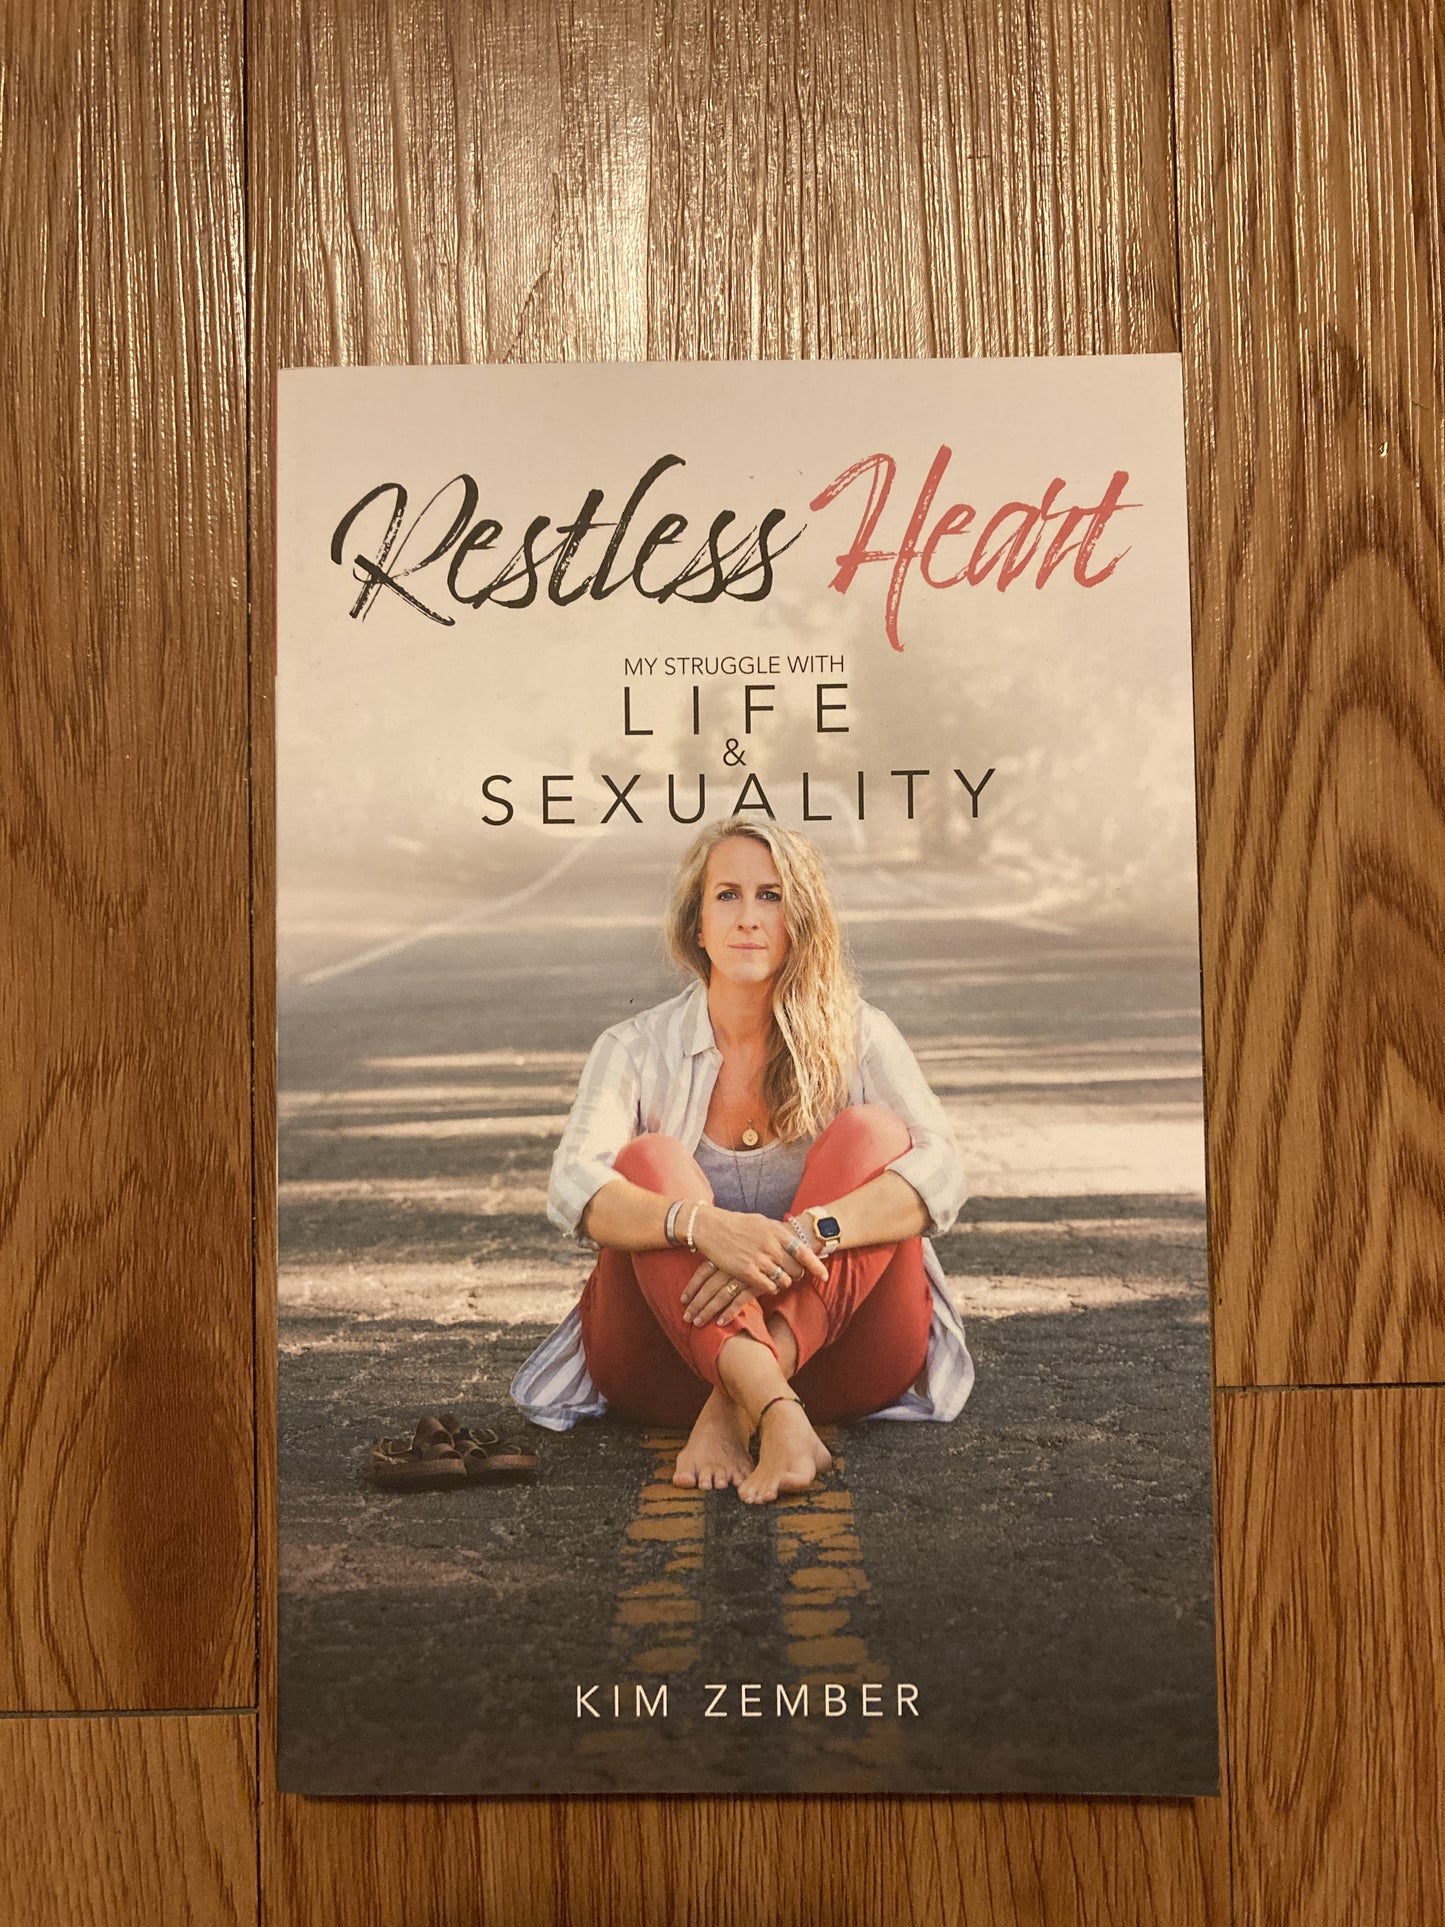 Restless Heart: My Struggle with Life & Sexuality